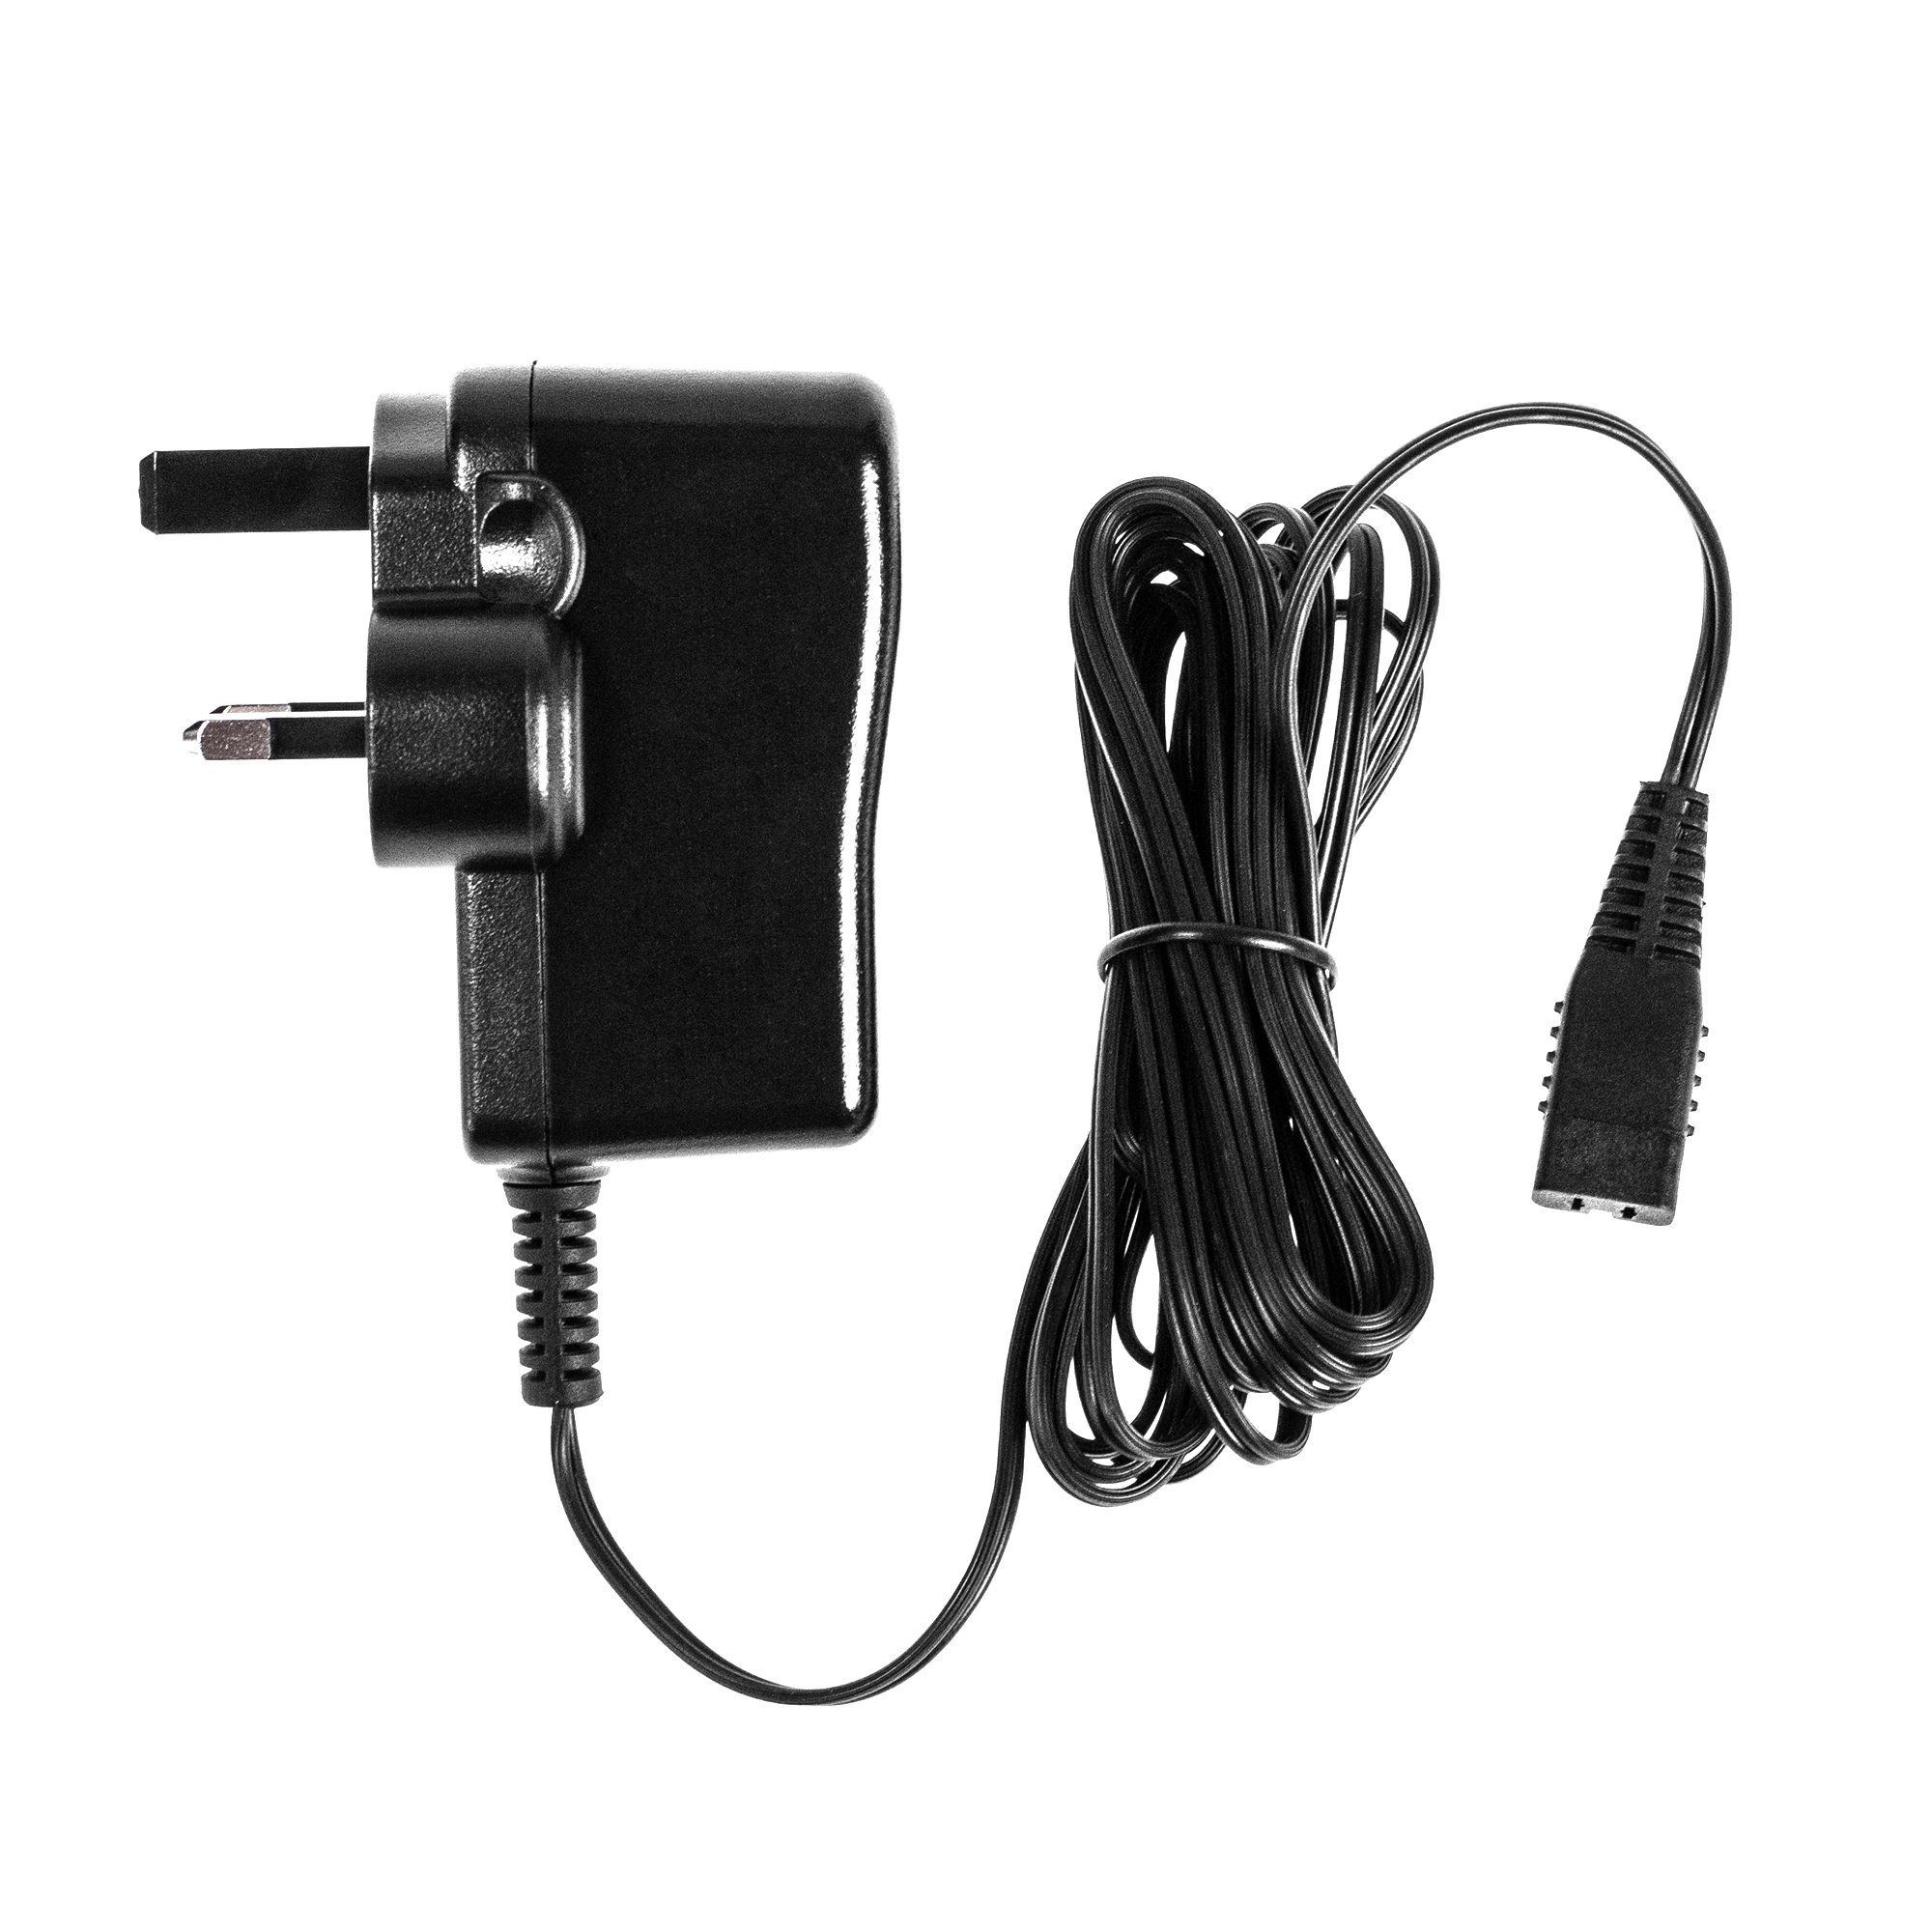 2M USB 5V 2A Black Charger Power Cable Adaptor for Wahl 9854L Grooming  Trimmer